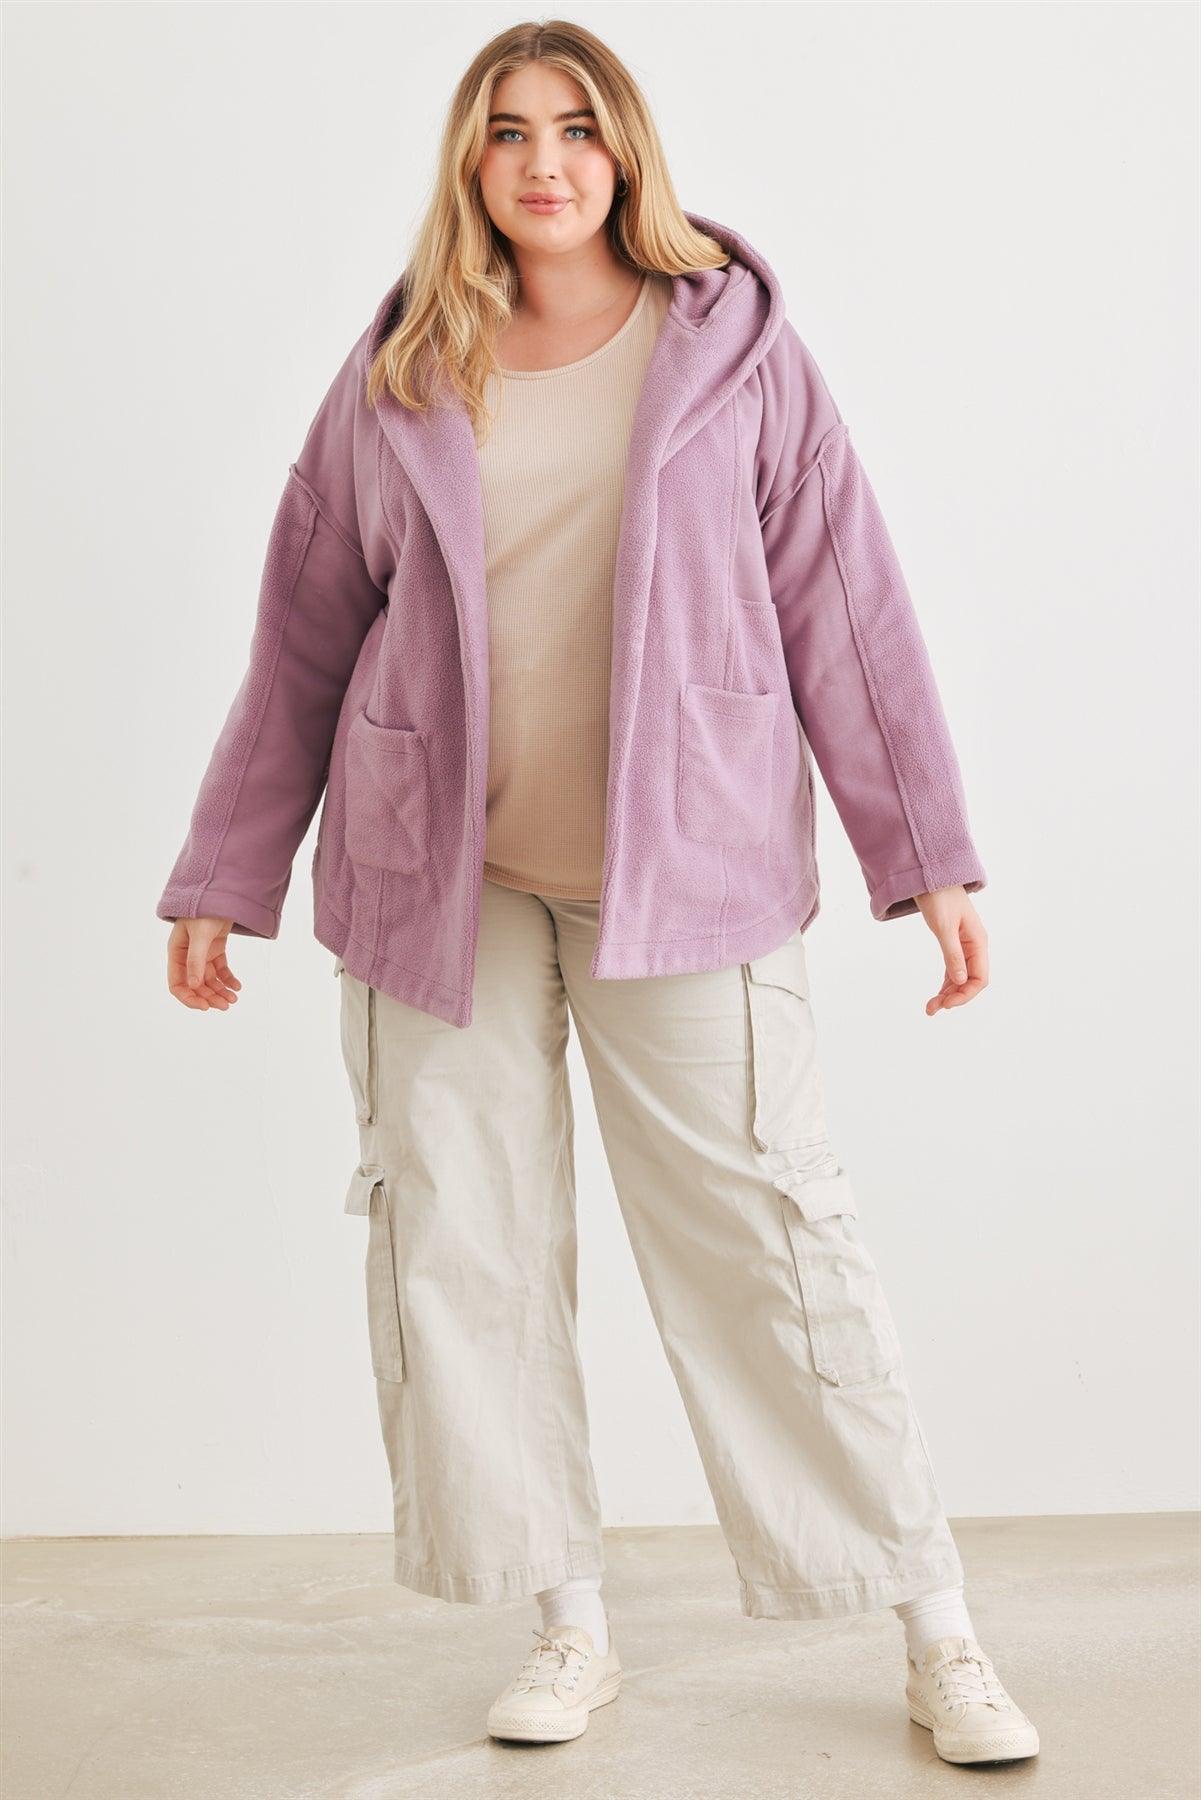 Junior Plus Mauve Two Pocket Open Front Soft To Touch Hooded Cardigan Jacket /2-2-2